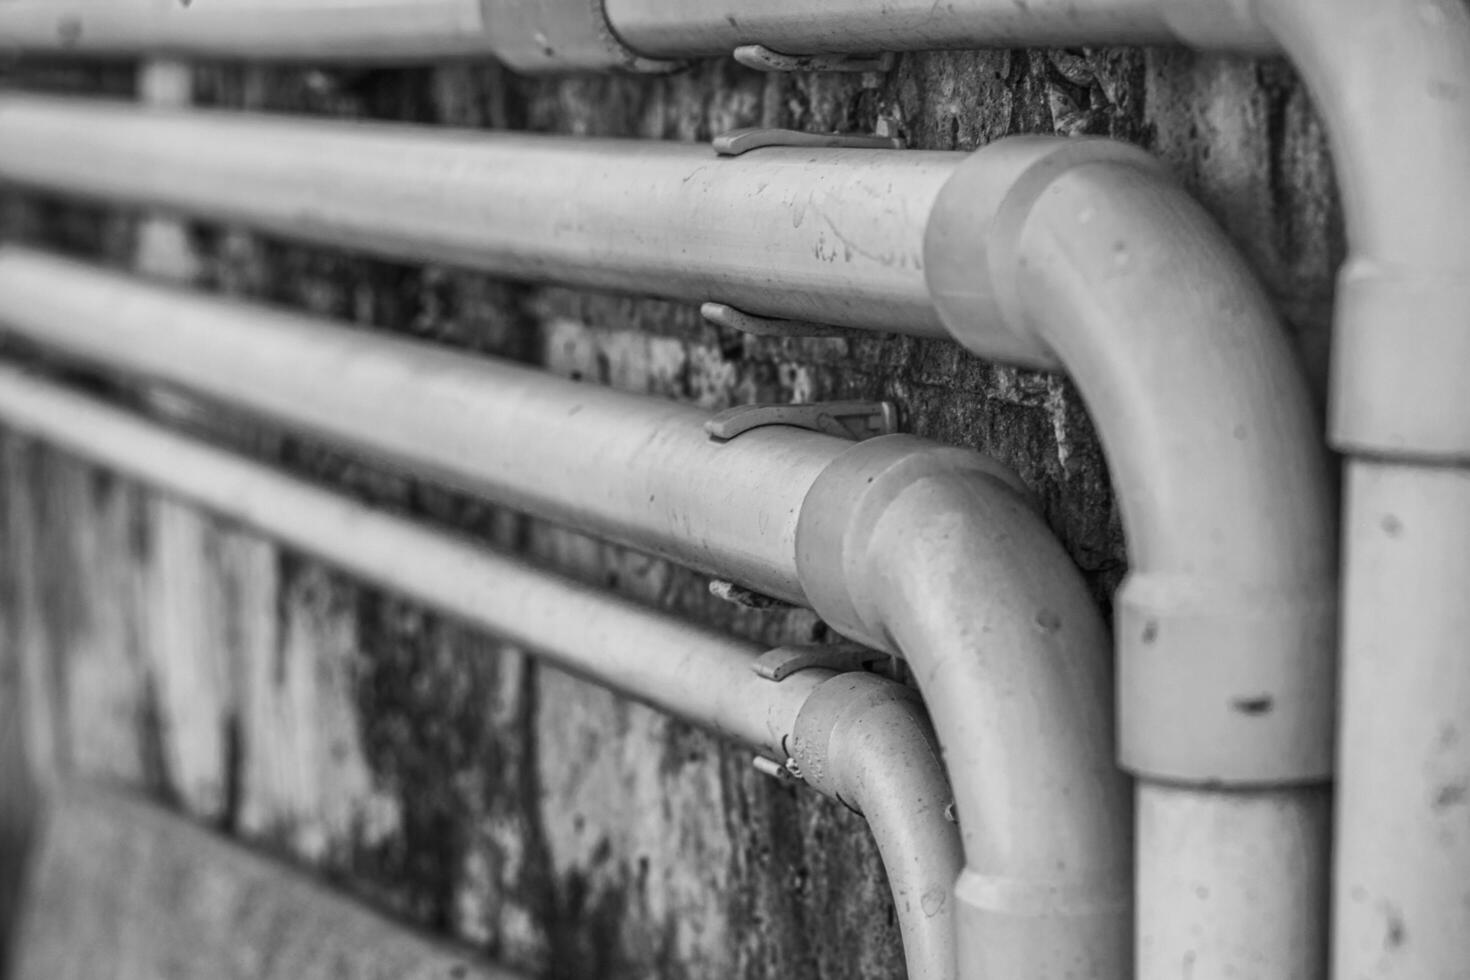 PVC plumbing pipes arranged beautifully. This picture is black and white. photo